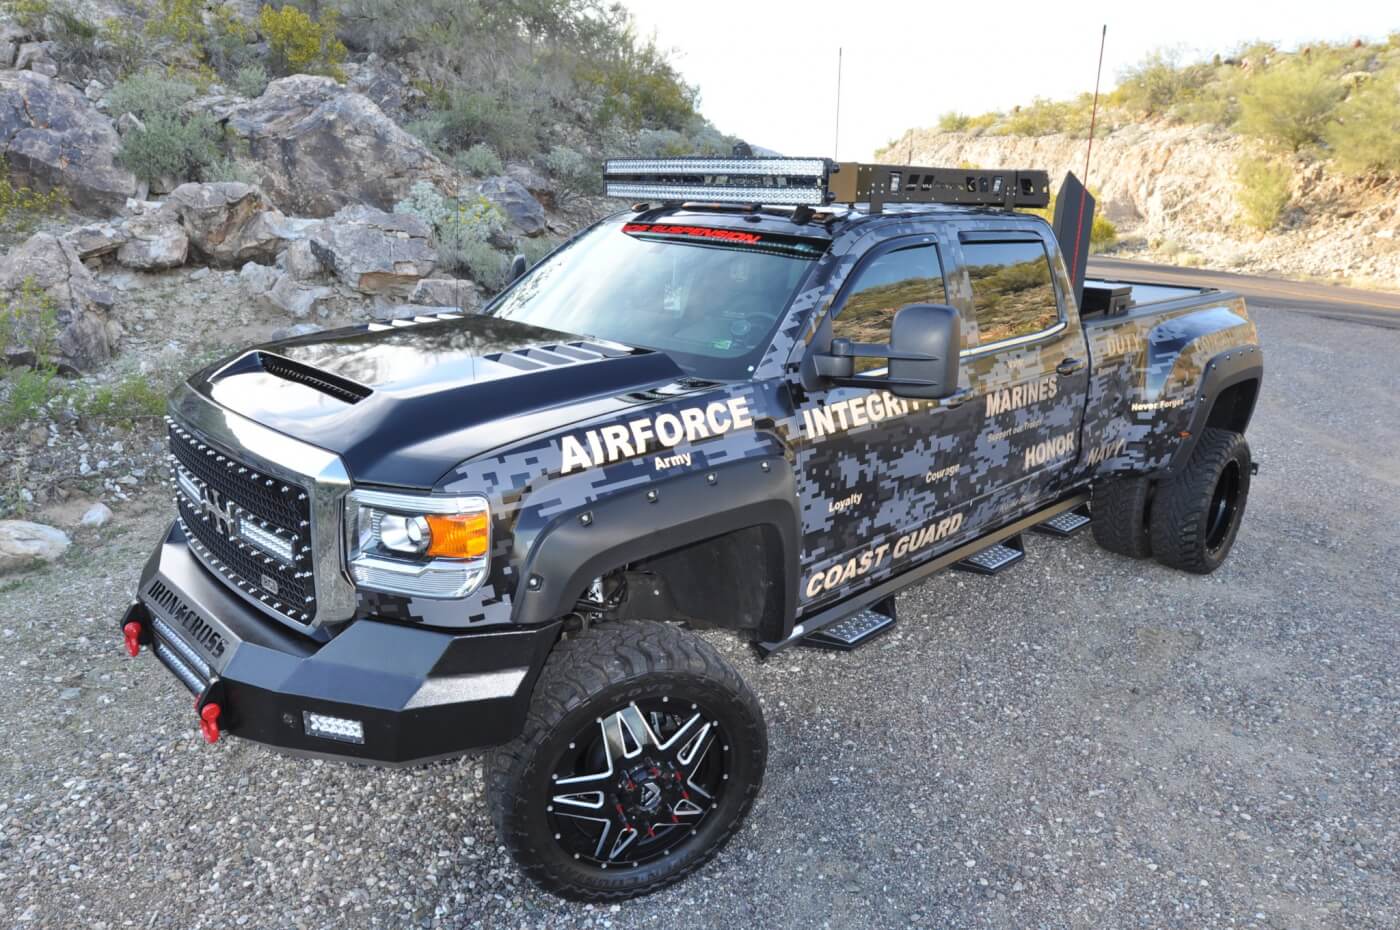 The graphics were applied using 3M 1080 digital camo wrap. There are words underneath the wrap that only show up when light is shined on them. 